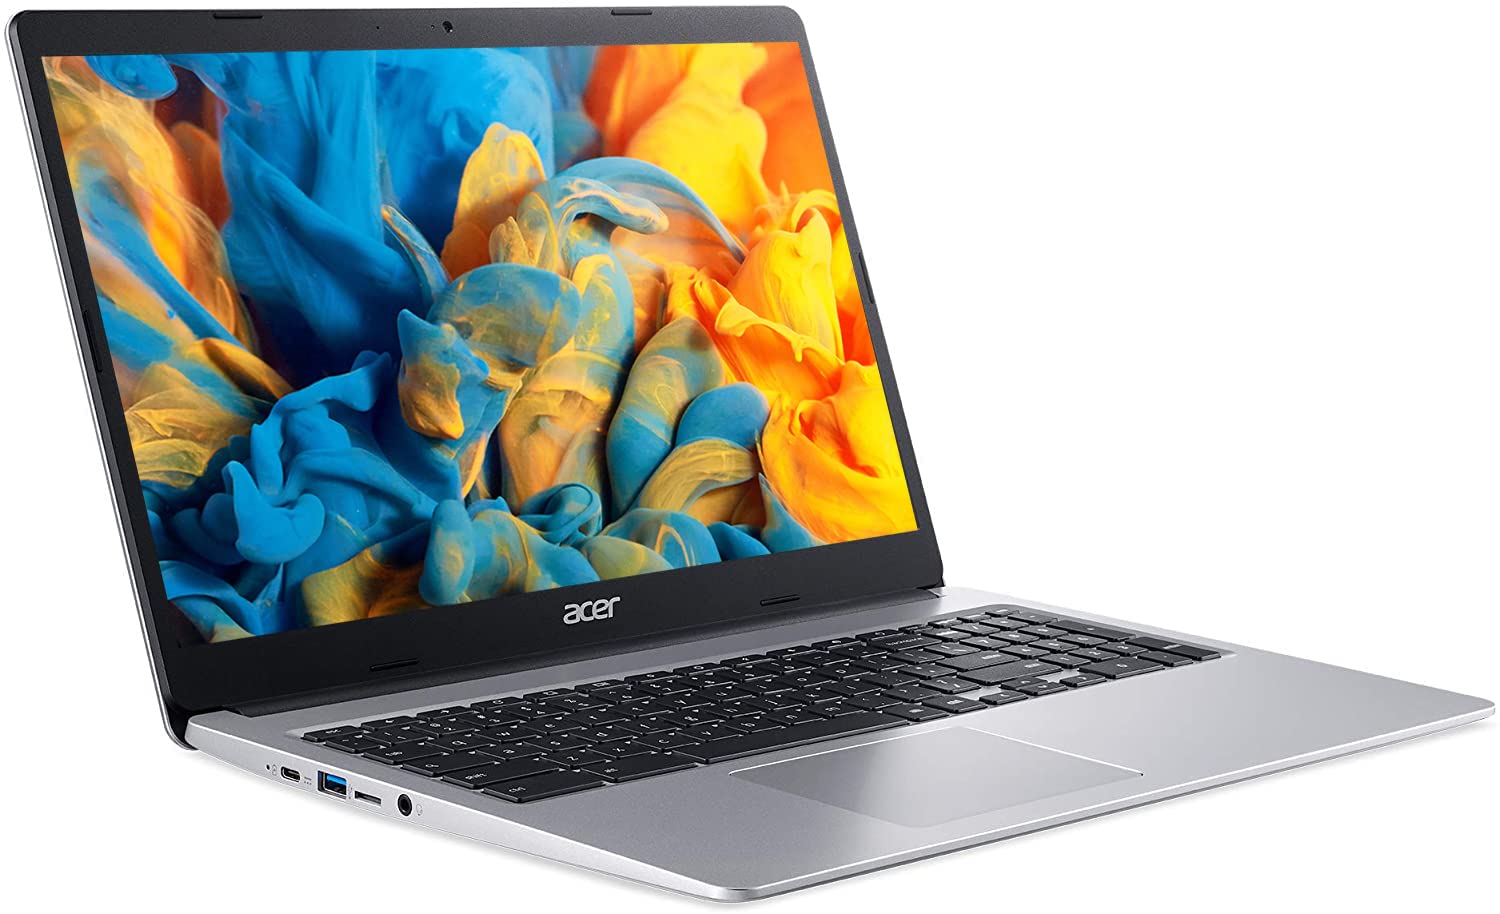 Acer 2022 15inch HD IPS Chromebook, Intel Dual-Core Celeron Processor Up to 2.55GHz, 4GB RAM, 32GB Storage, Super-Fast WiFi Up to 1300 Mbps, Chrome OS-(Renewed) (Dale Silver)